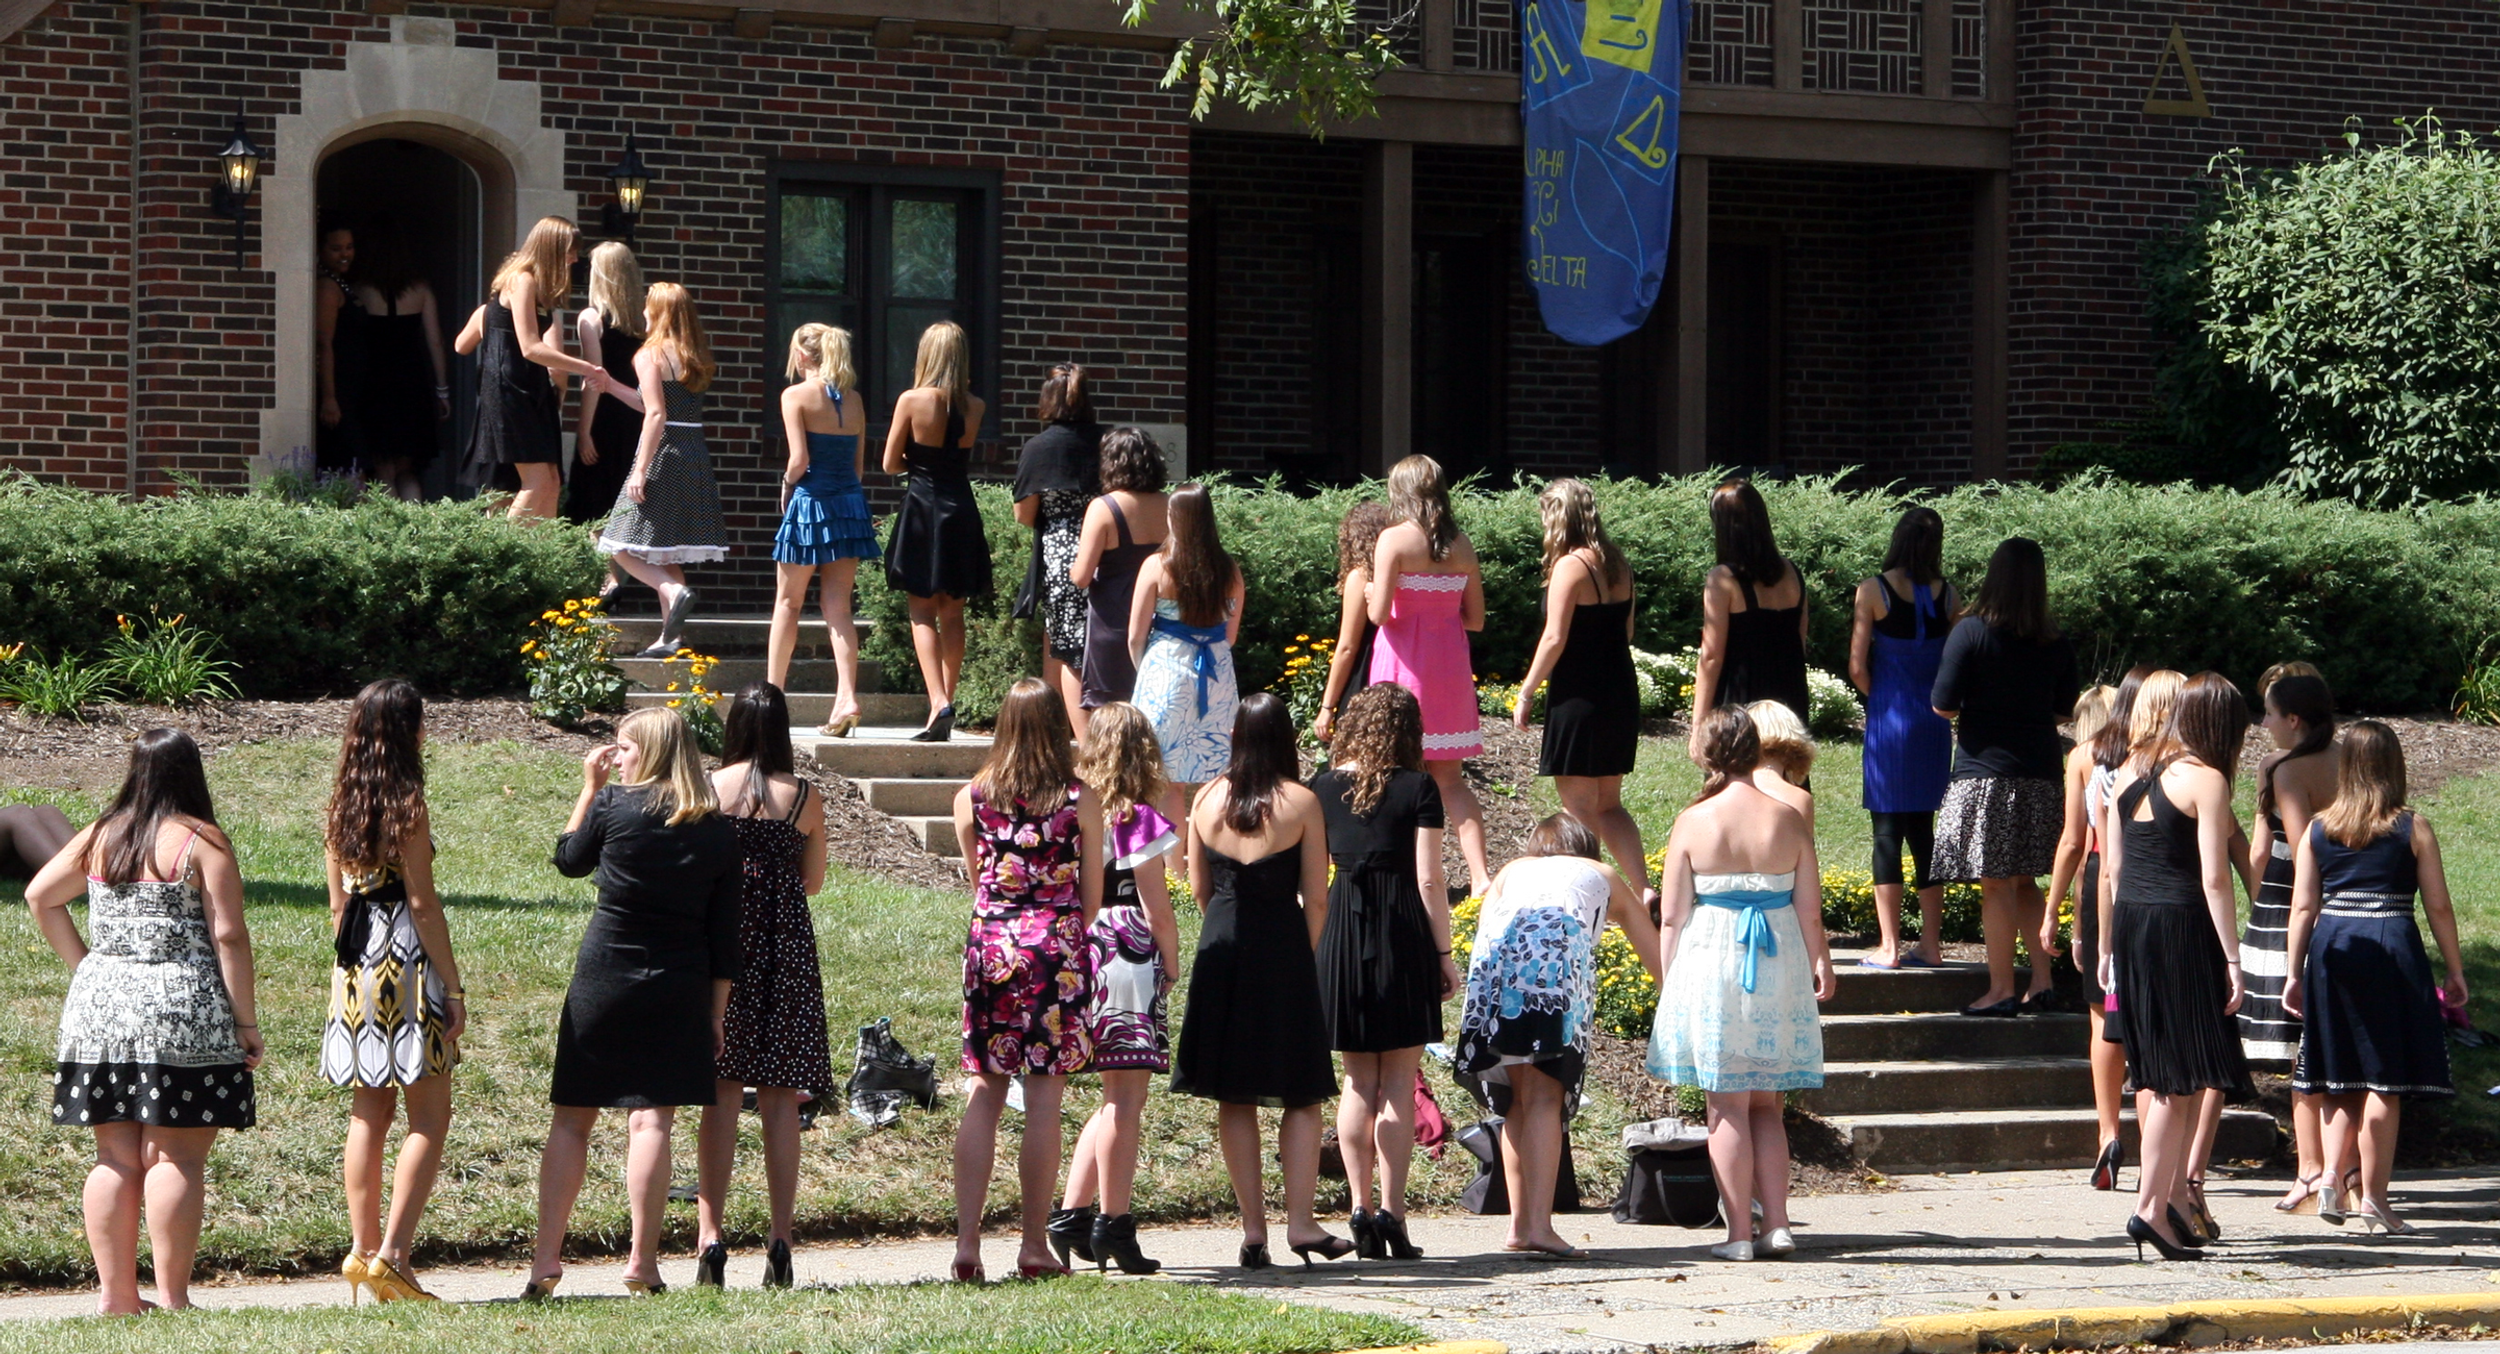 Why I Will Never Join A Sorority